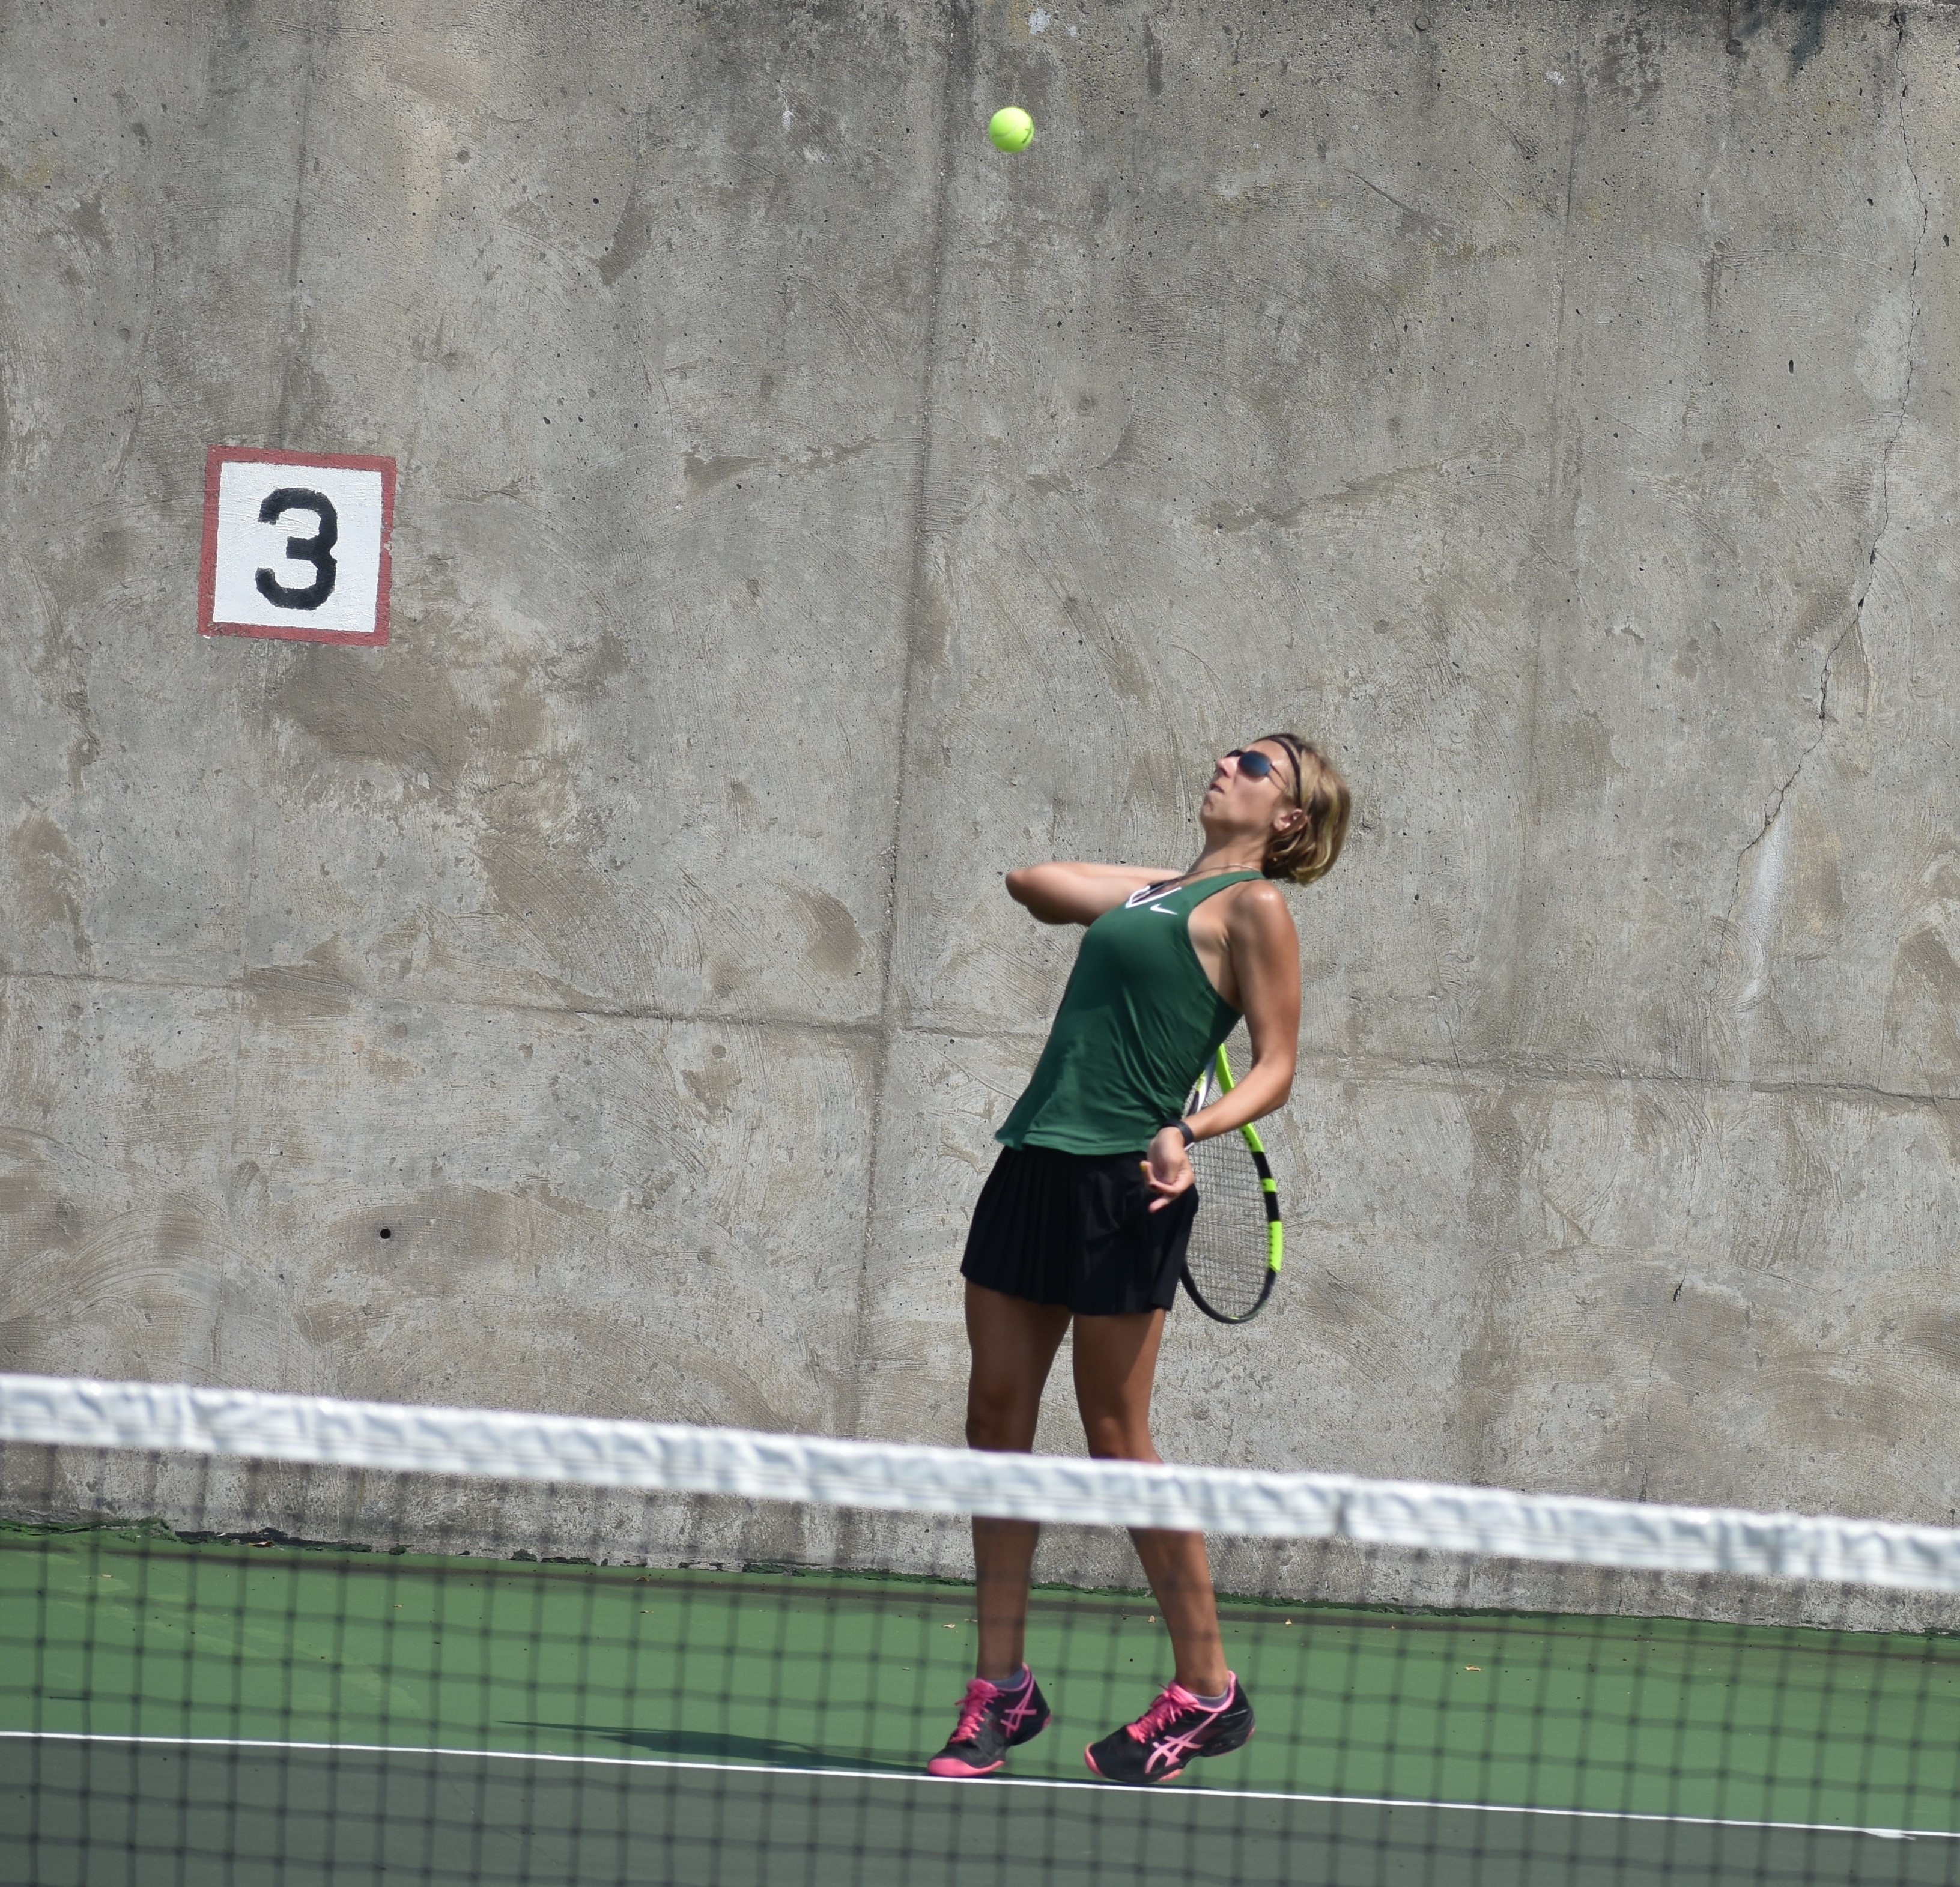 Jaguars tennis goes undefeated in Beaver Dam